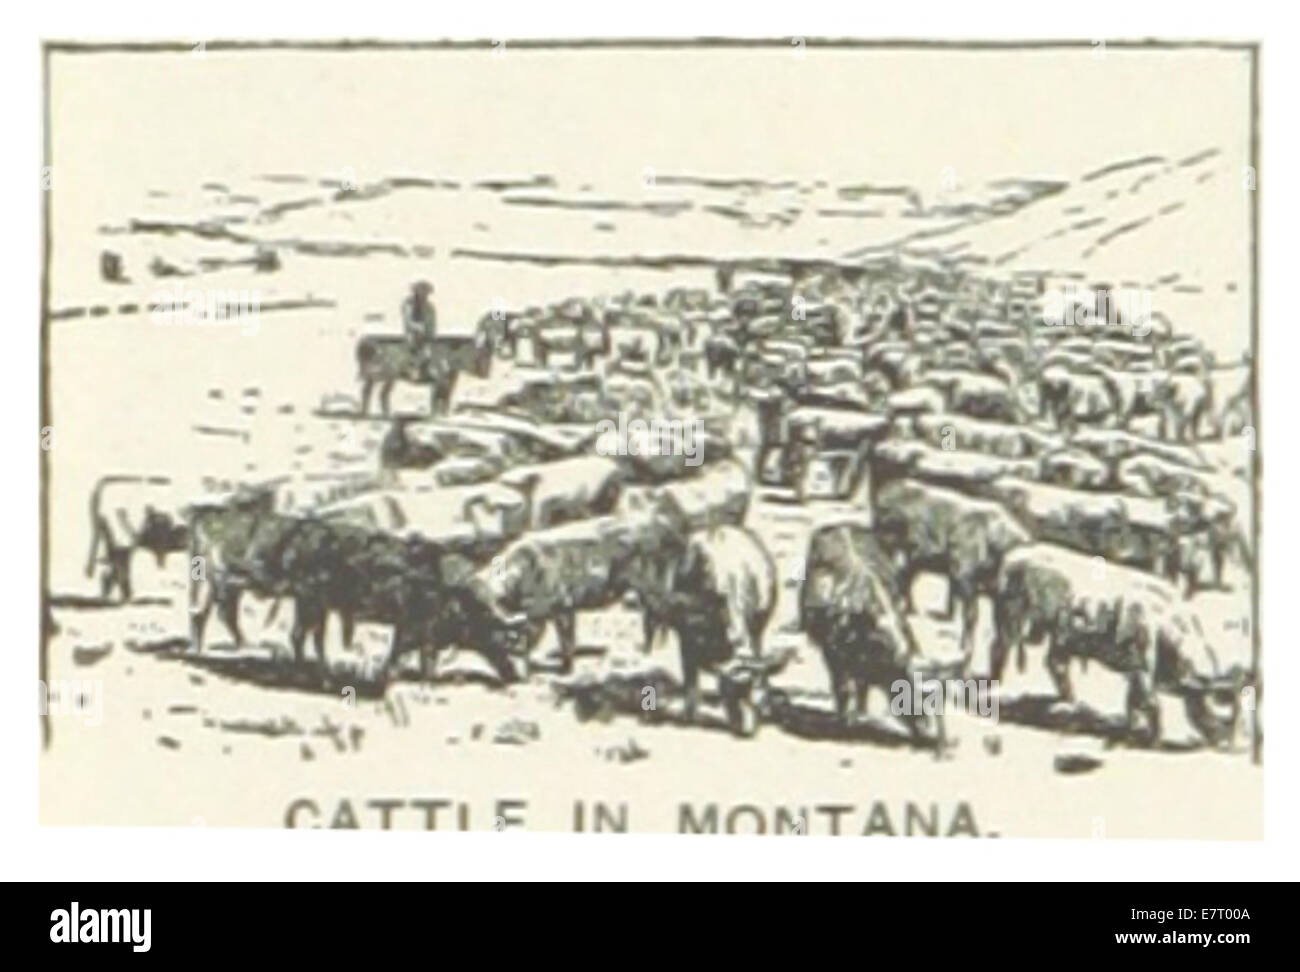 US-MT(1891) p518 CATTLE IN MONTANA Stock Photo